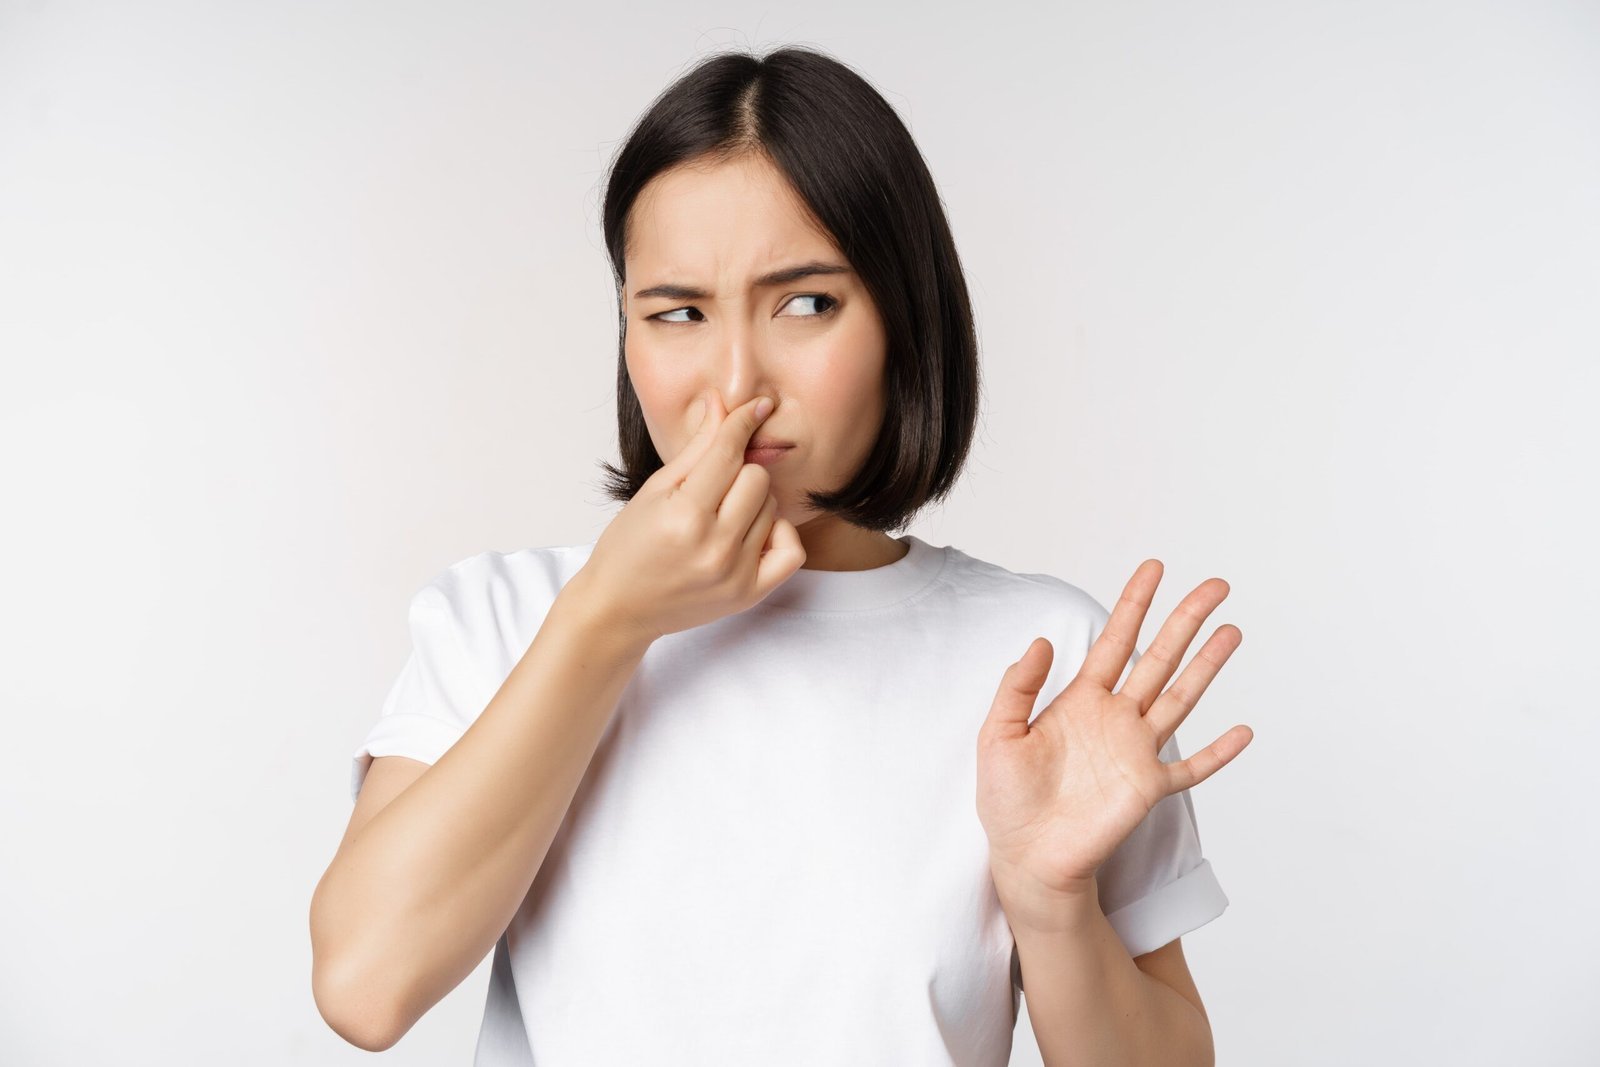 A woman in a white t-shirt is making a displeased face and holding her nose with one hand, indicating a bad smell, while gesturing stop with her other hand.